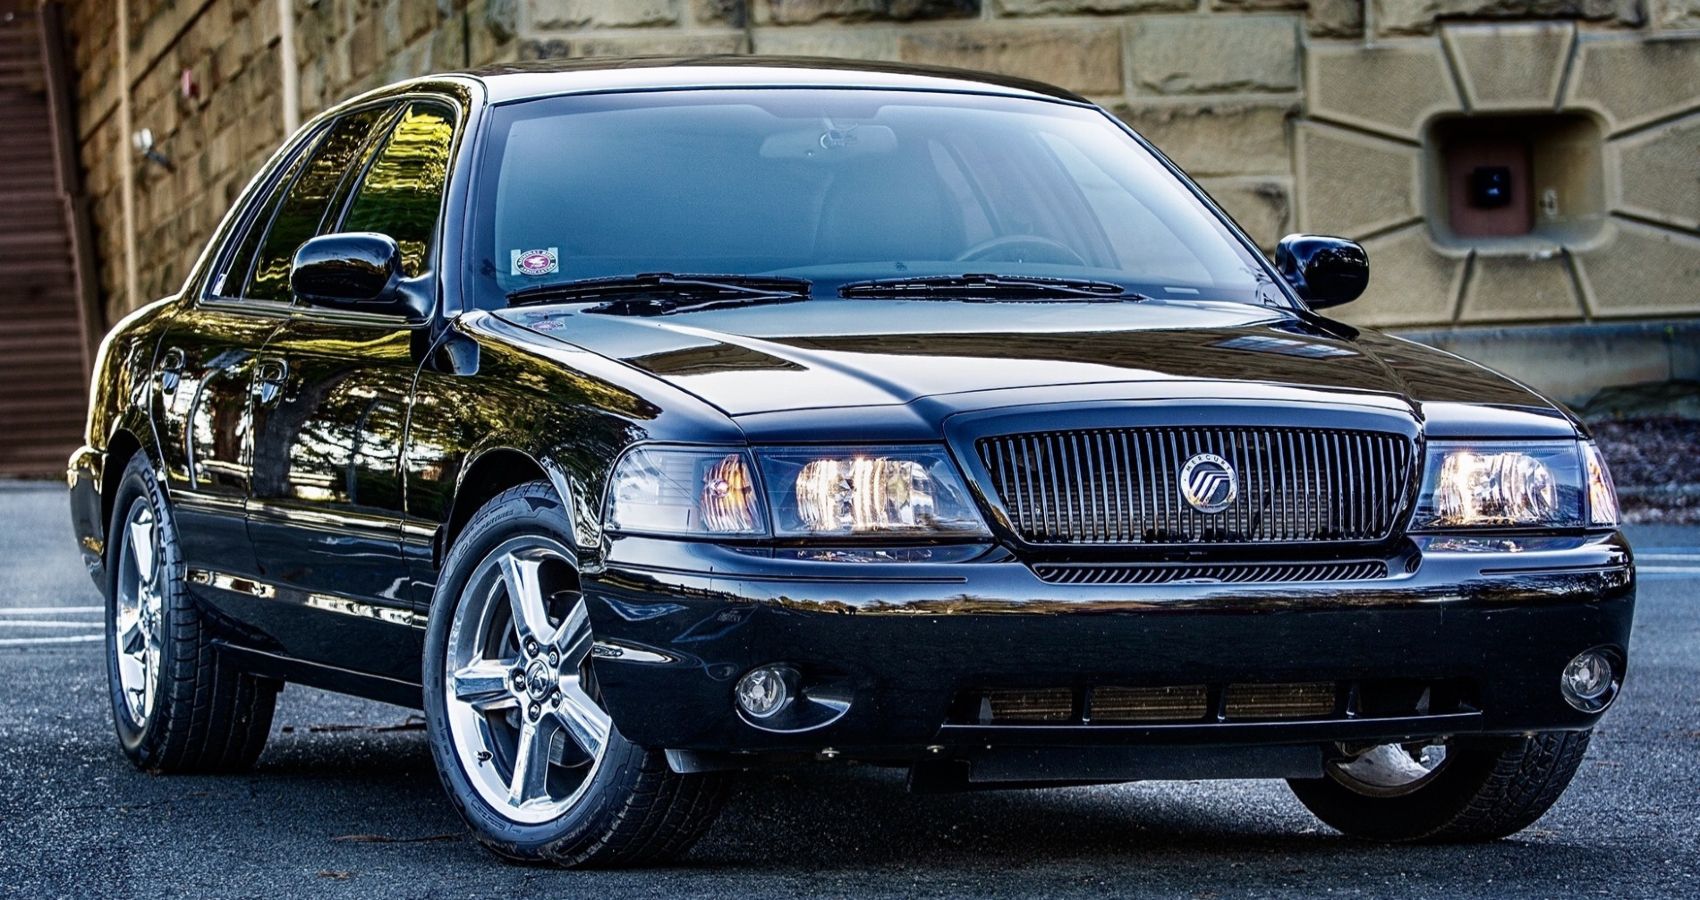 Black Mercury Marauder from the front